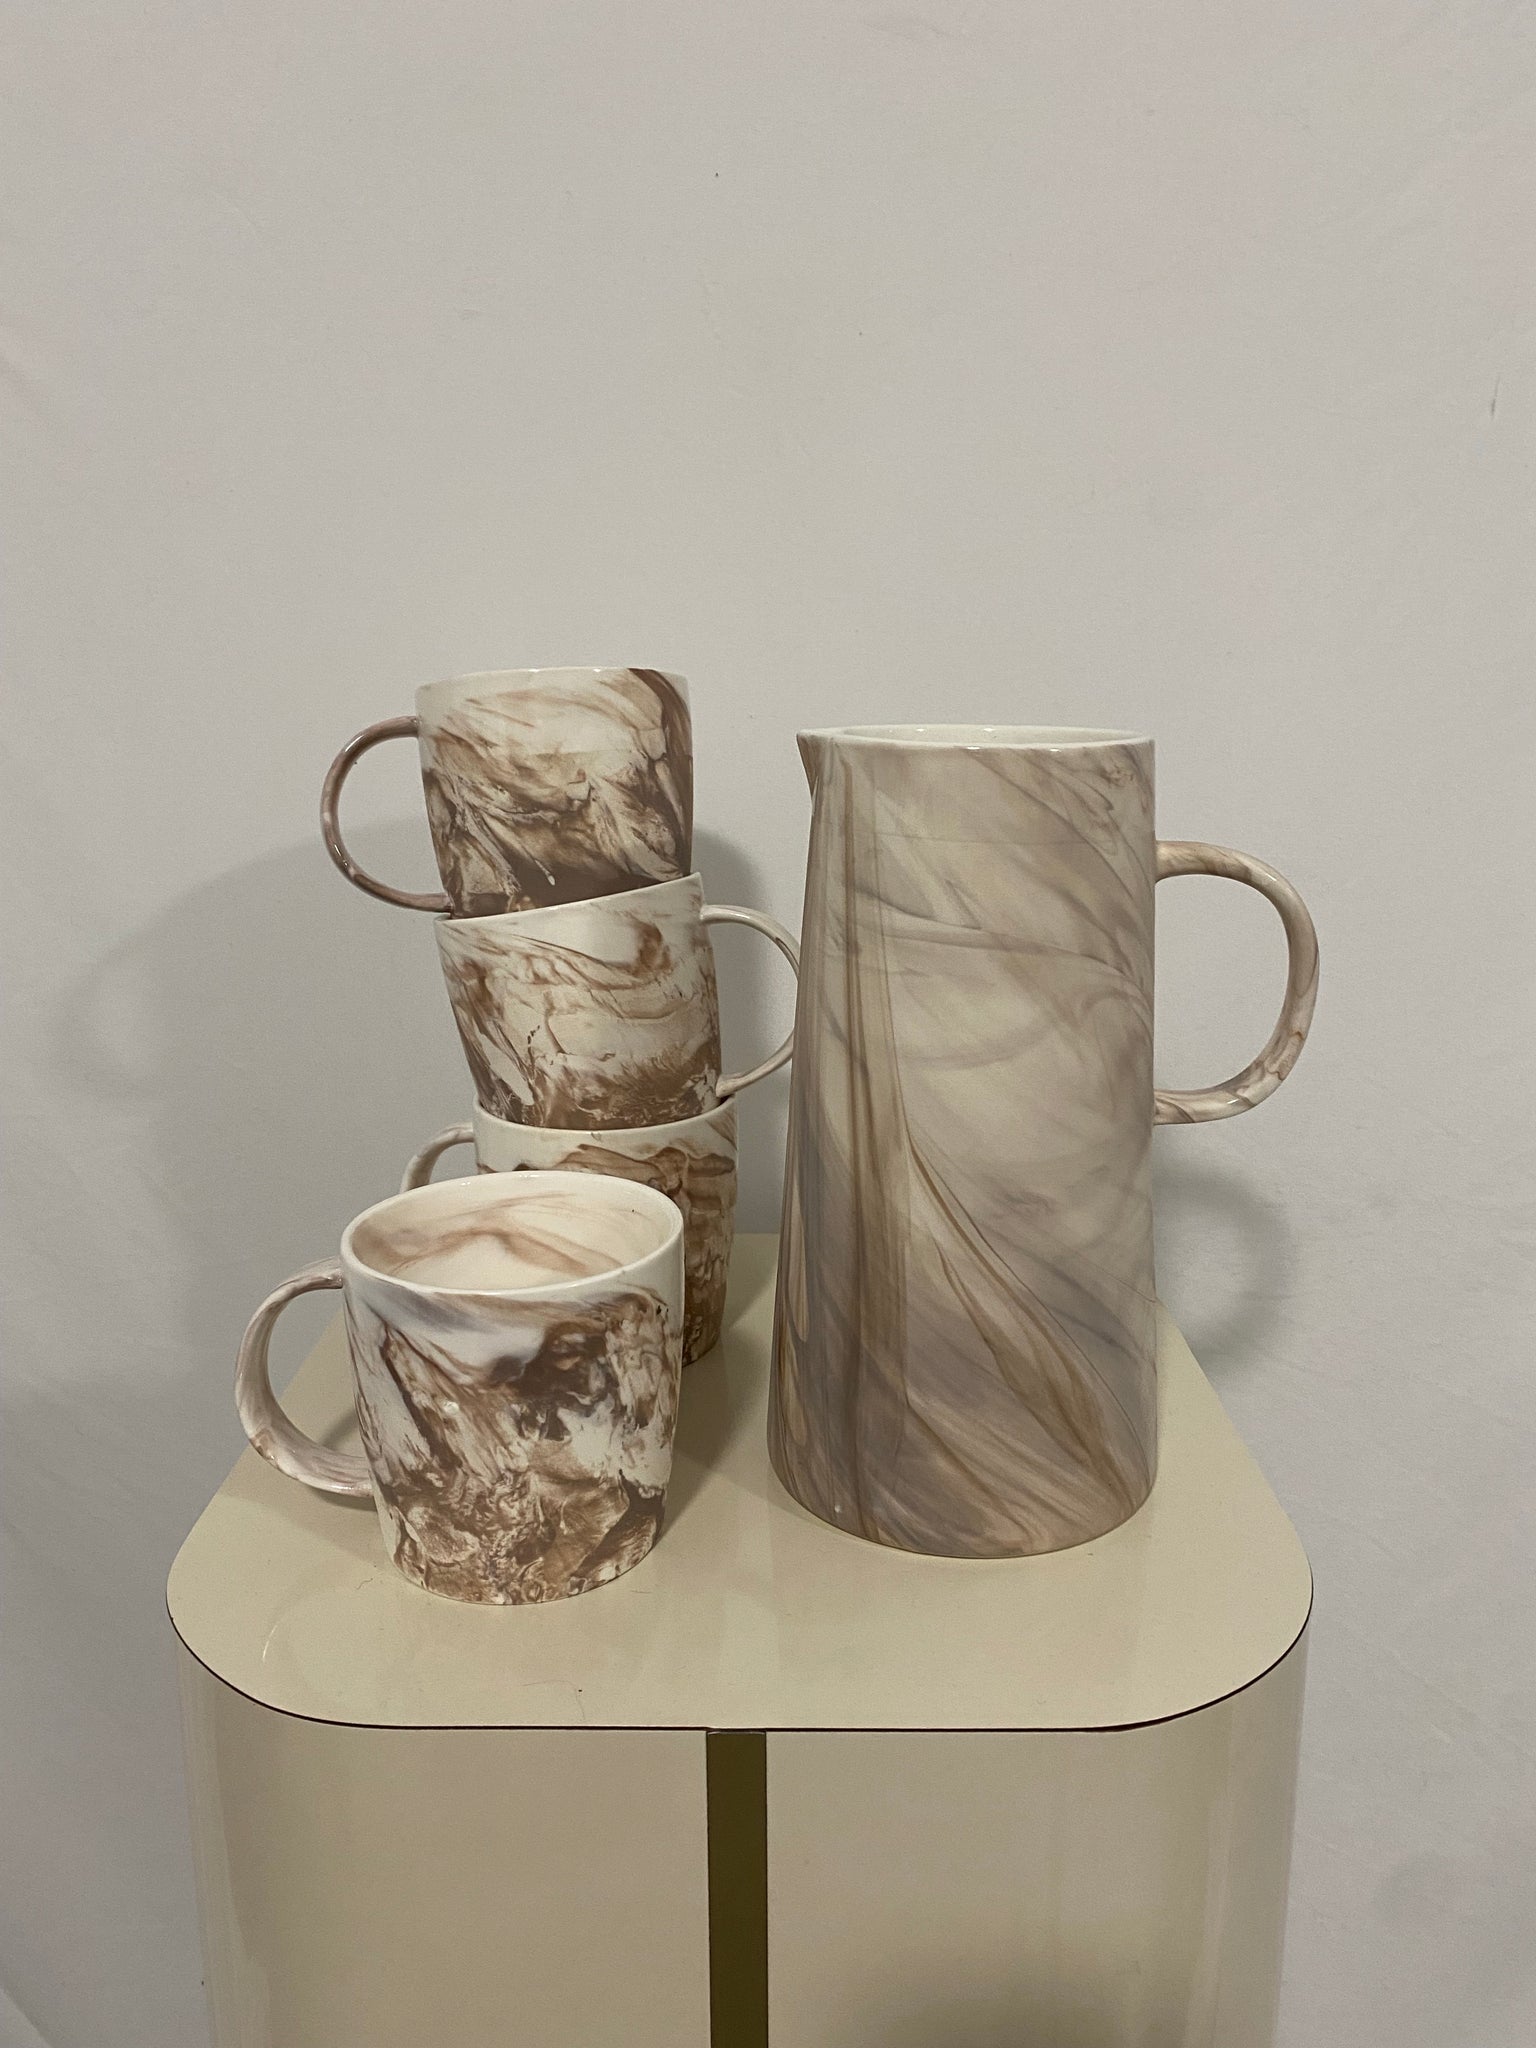 Marbled ceramic pitcher and mugs set